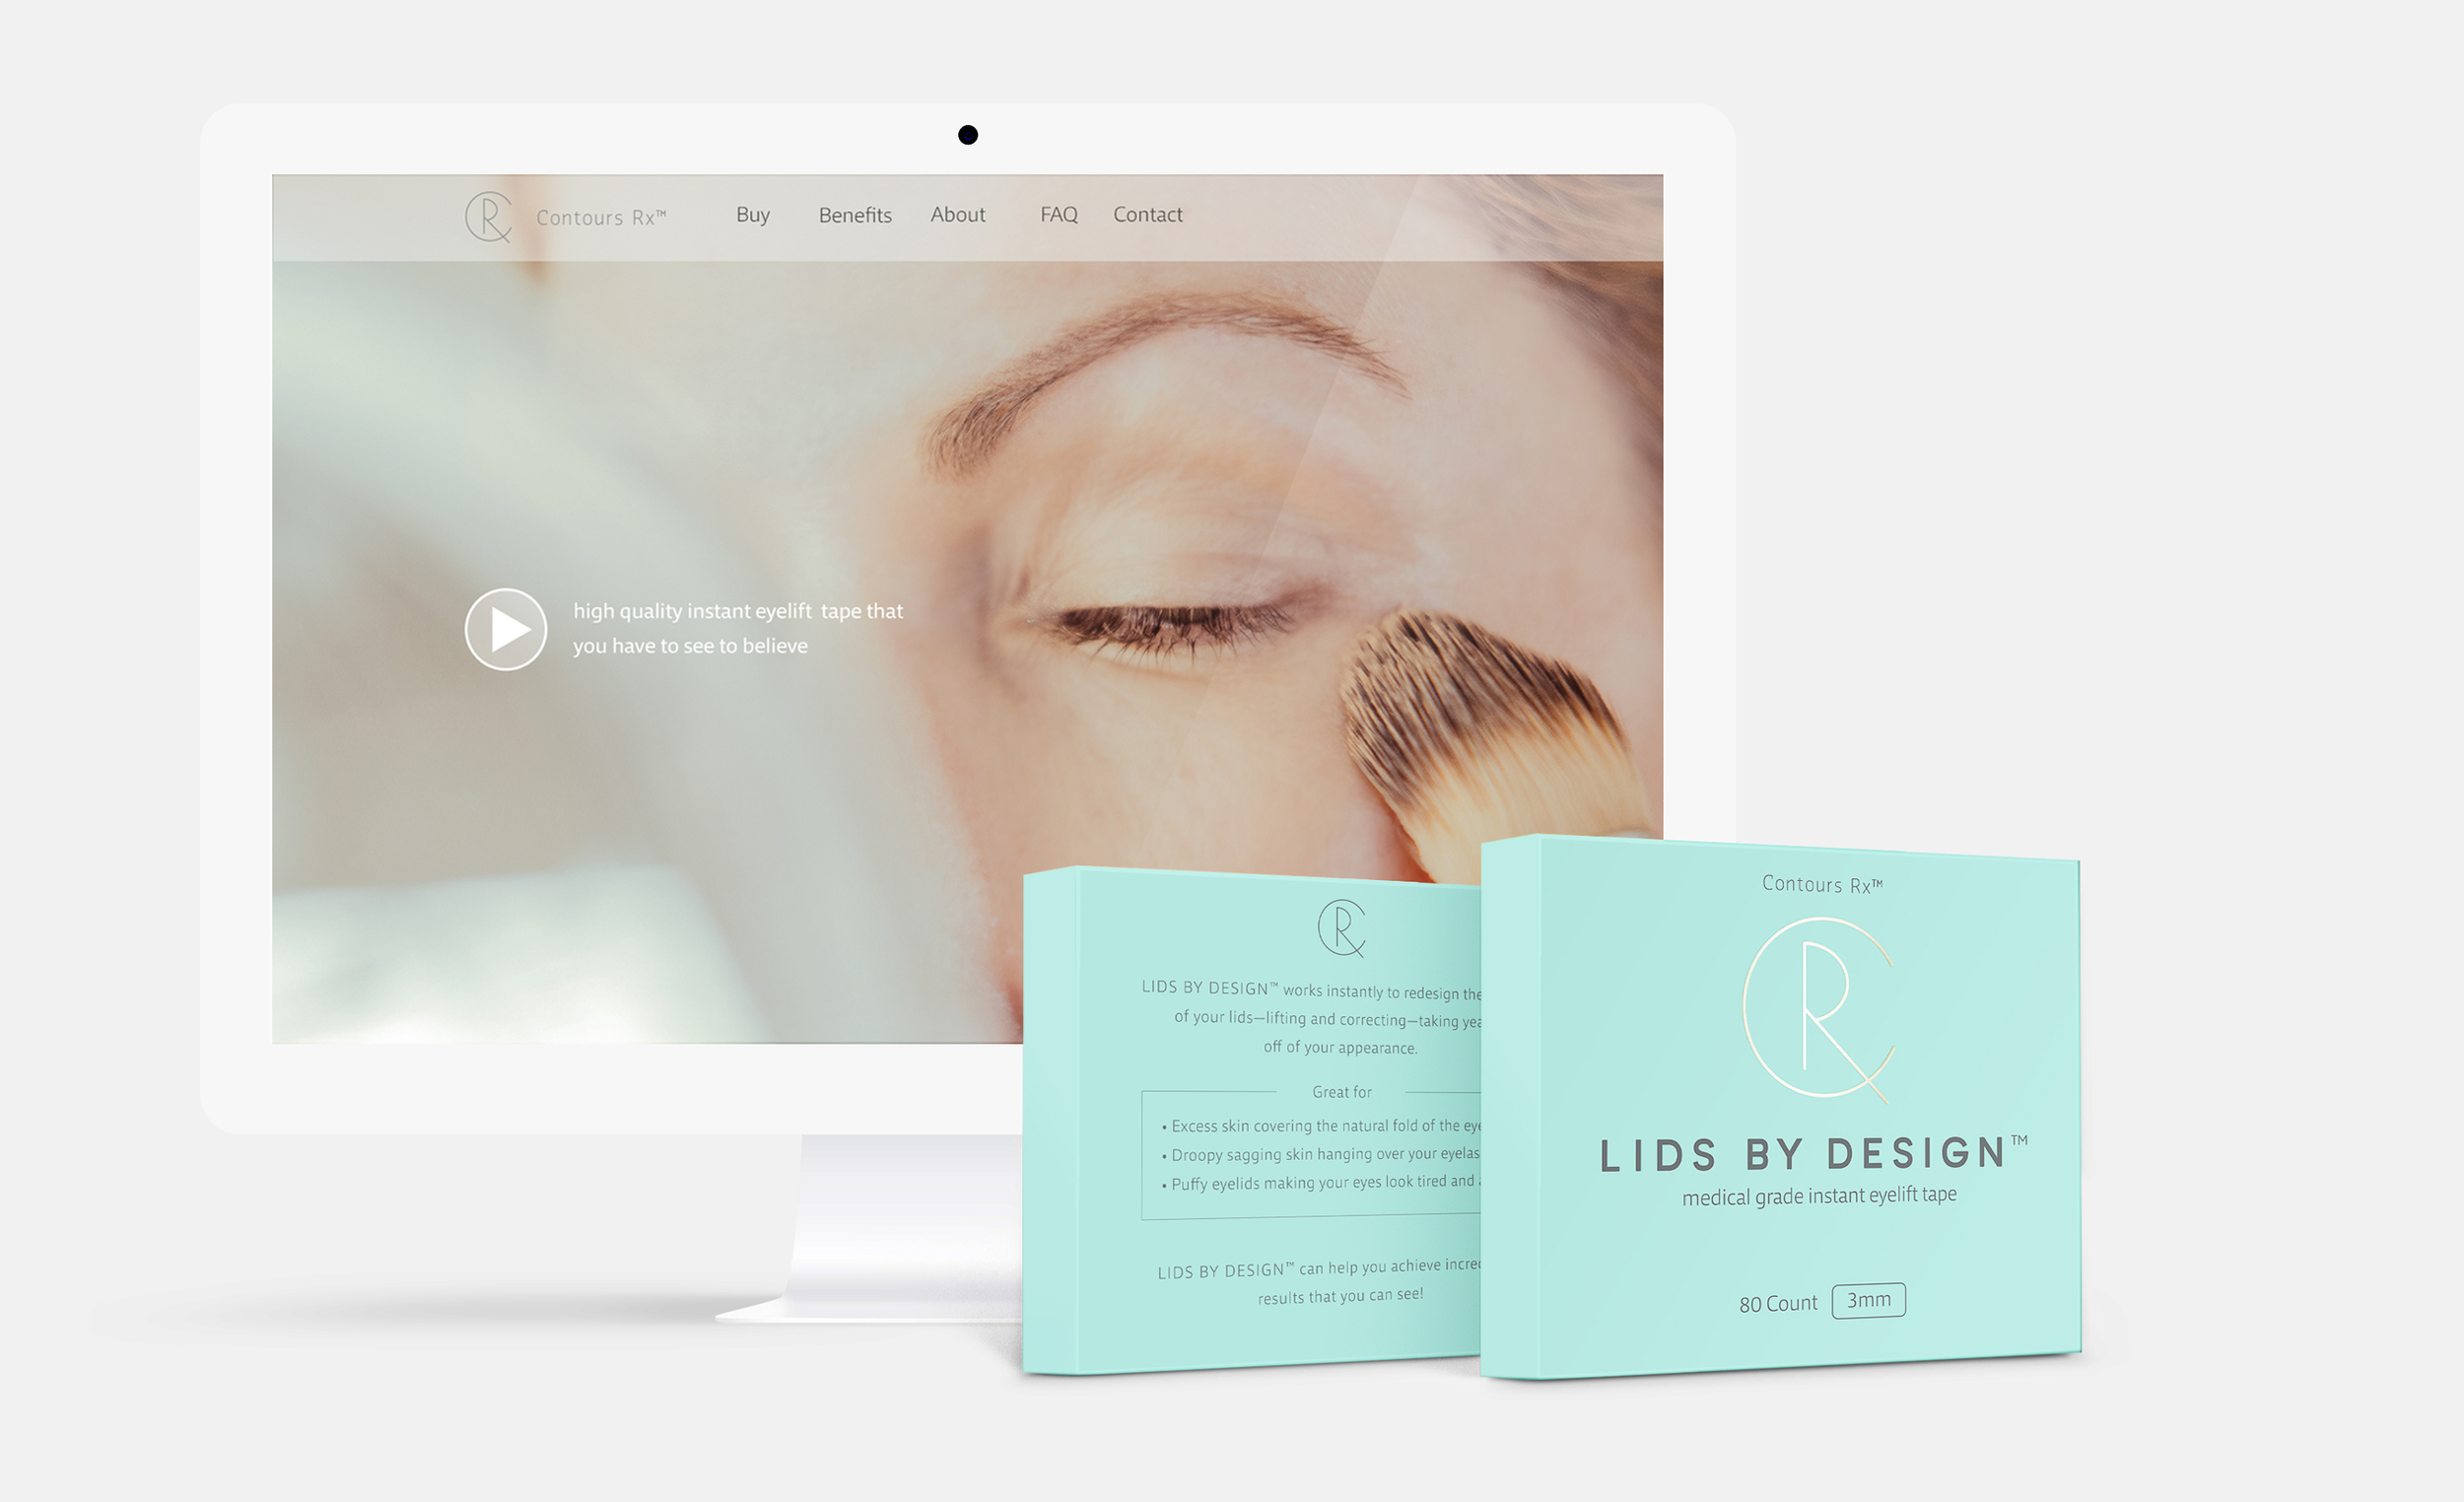 LIDS BY DESIGN: Get Instant Eyelid Lift Without Surgery by Britain  ContoursRx - Issuu